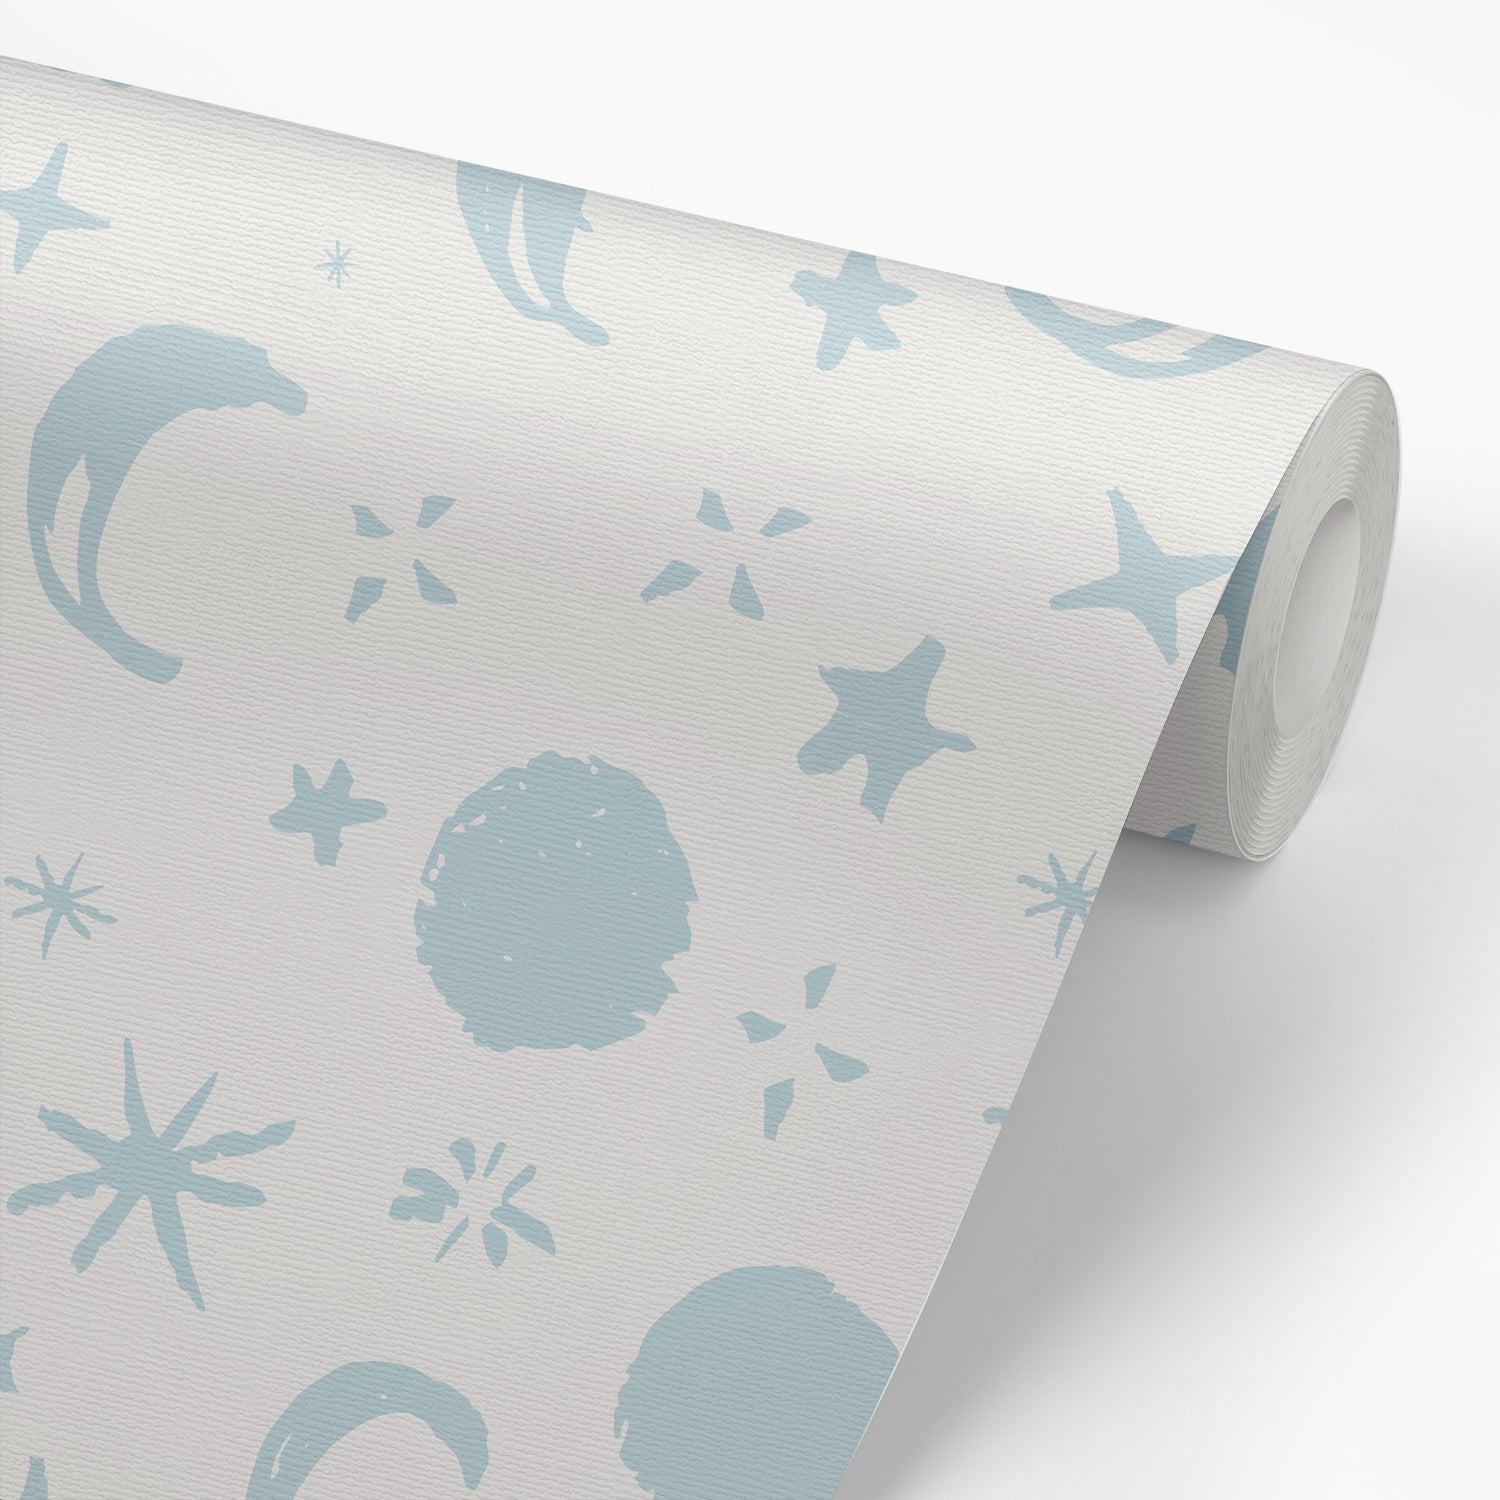 Featured on a roll of our luxury designer wallpaper, Emmett is an inspiring design by our artist Jackie O"Bosky. The carefully created moons and stars will bring positive energy to any space. 